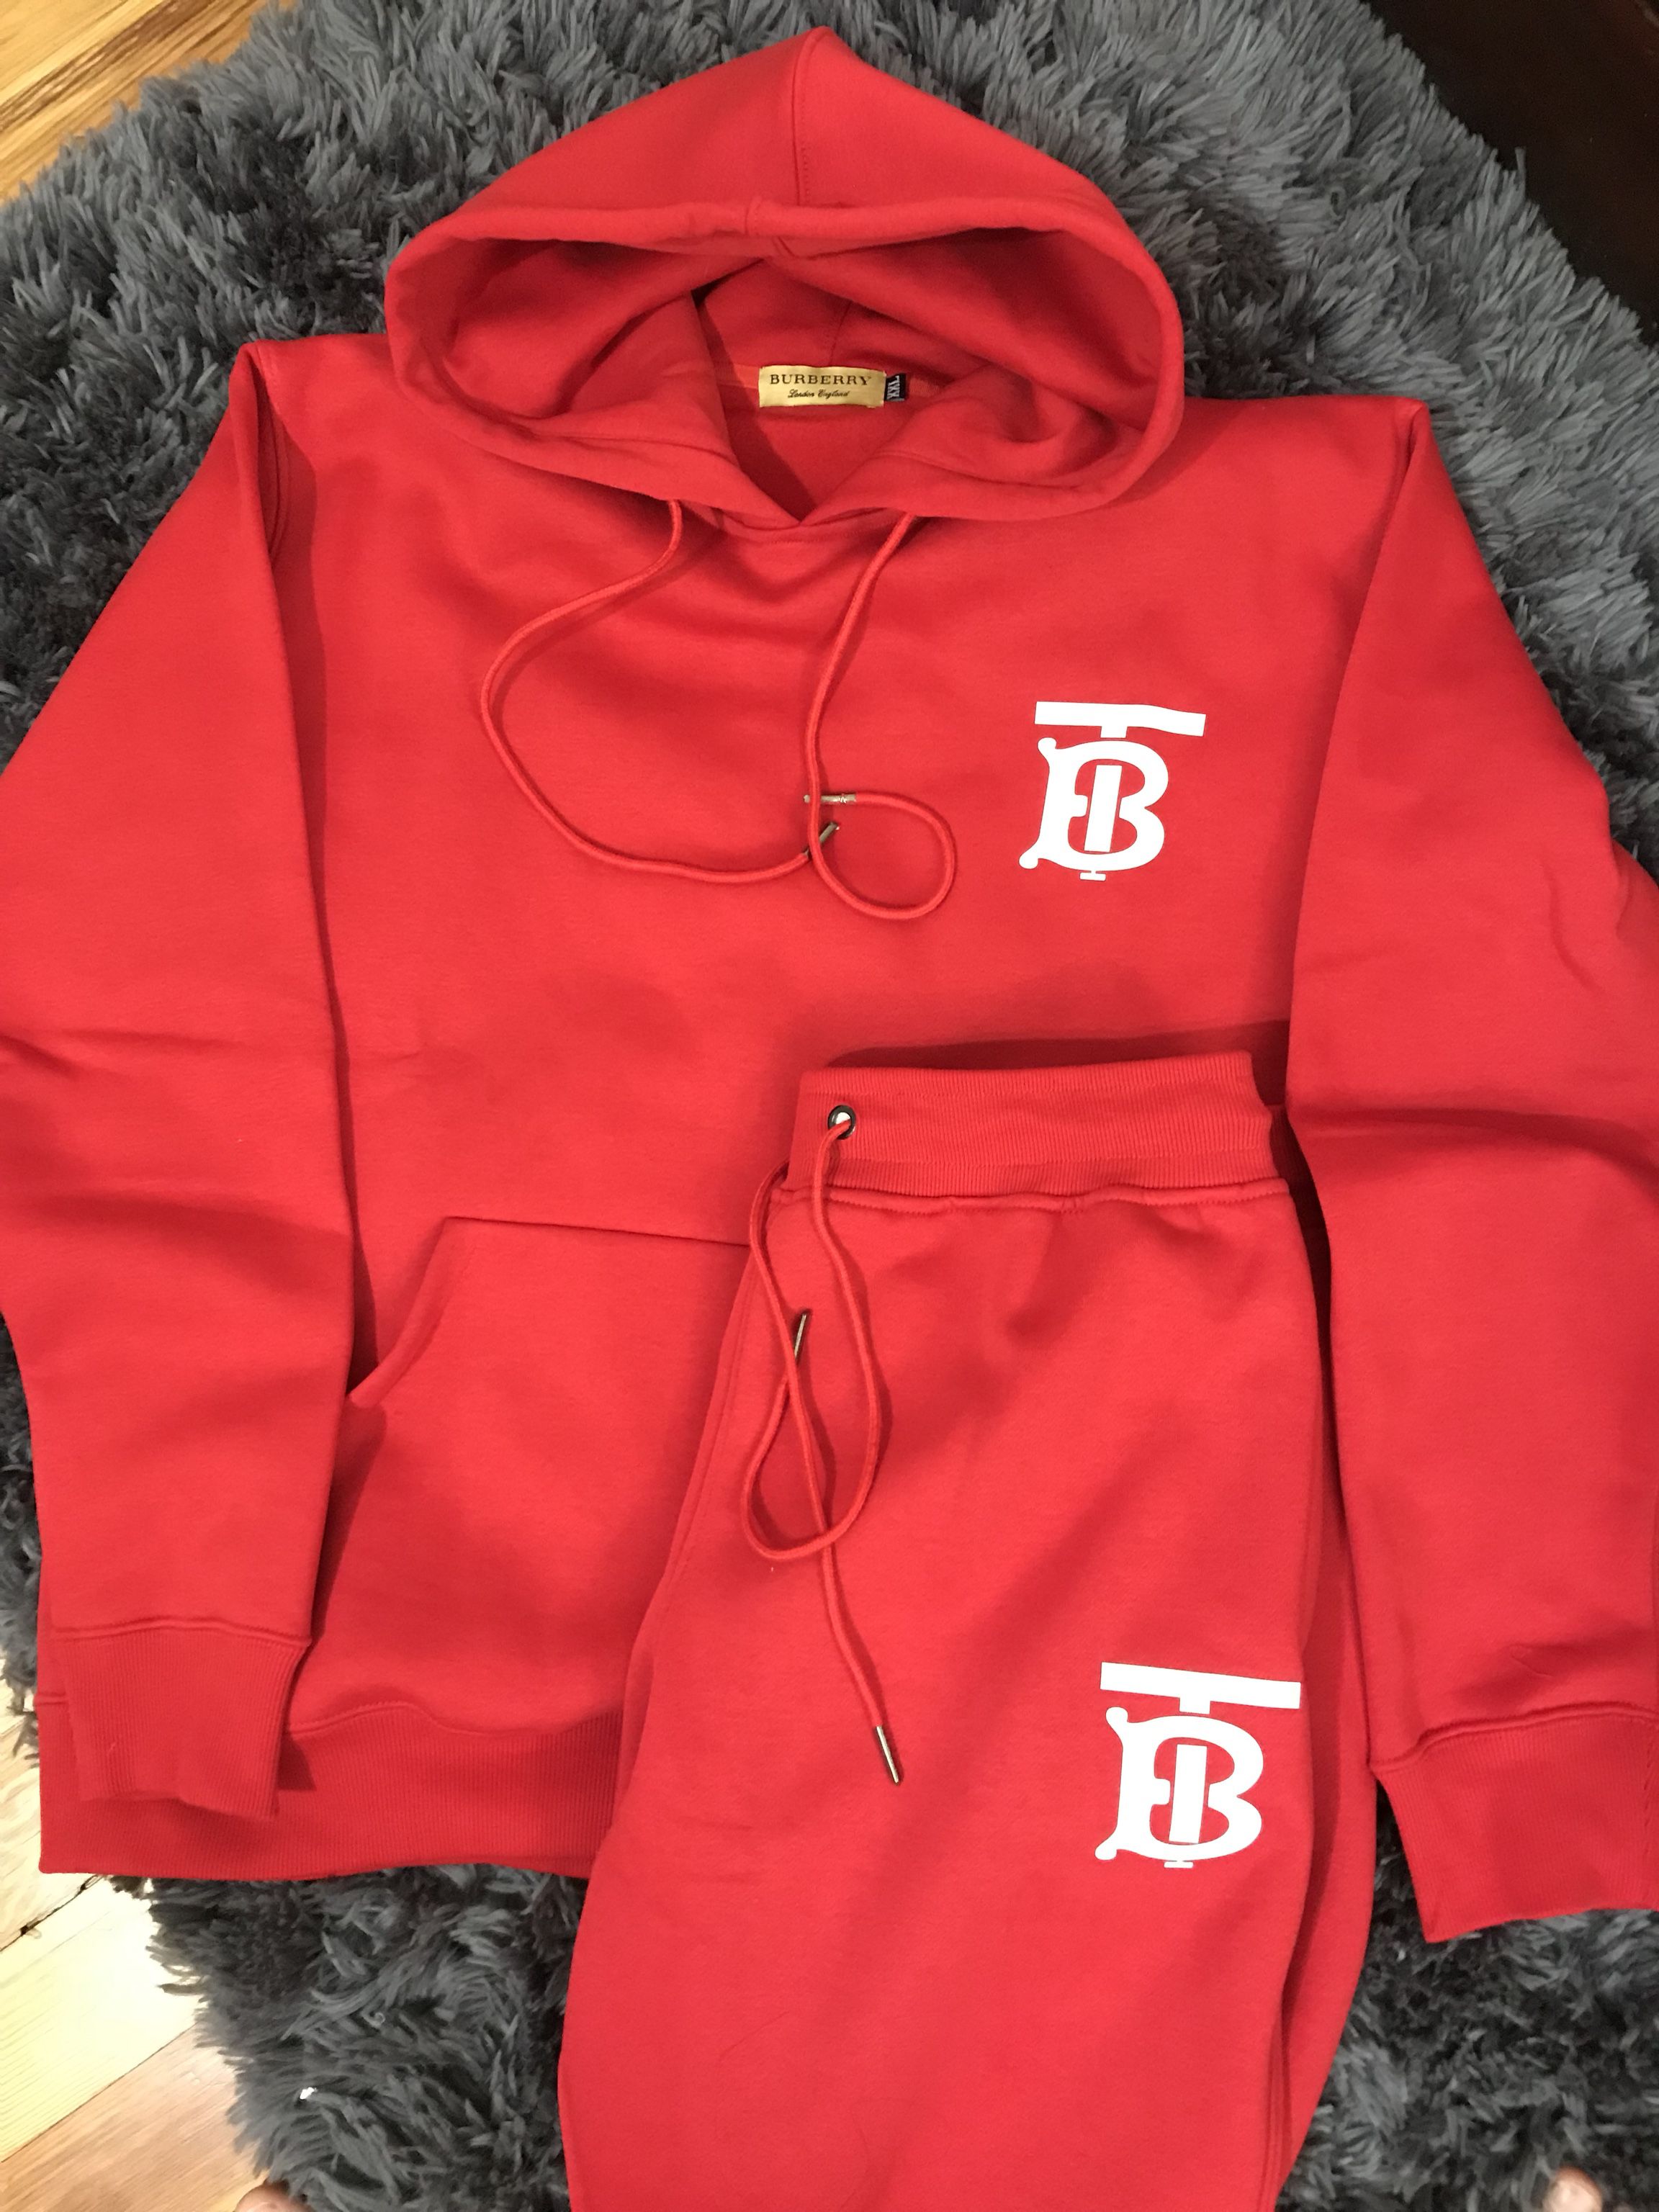 BURBERRY TRACK SUIT LARGE!